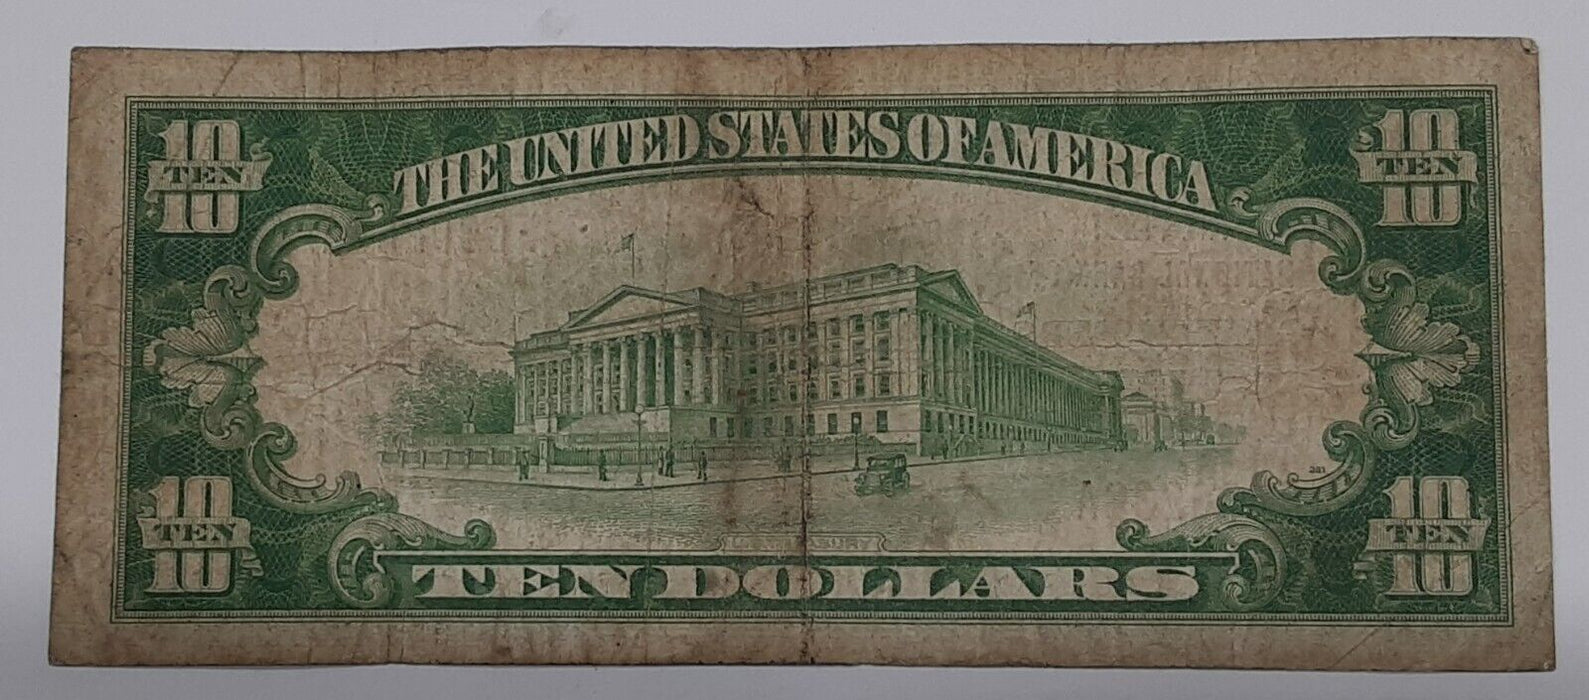 1929 $10 Nat'l Currency Note 1st Nat'l Bank of Gaithersburg, MD CH#4608 Fine  SL